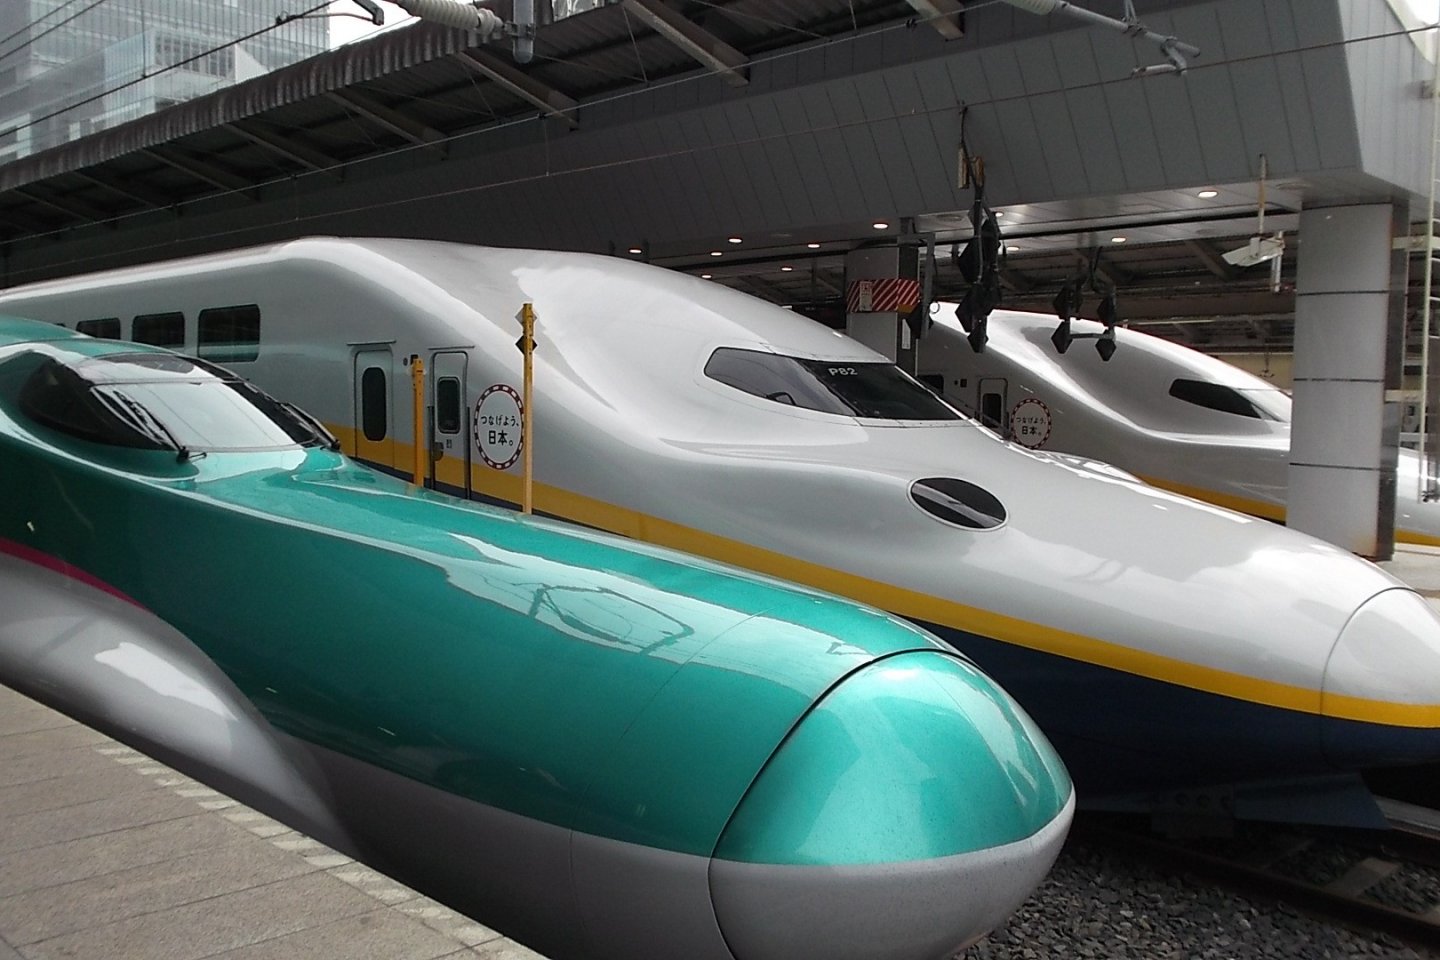 Bullet Trains are various shapes, and aerodynamic